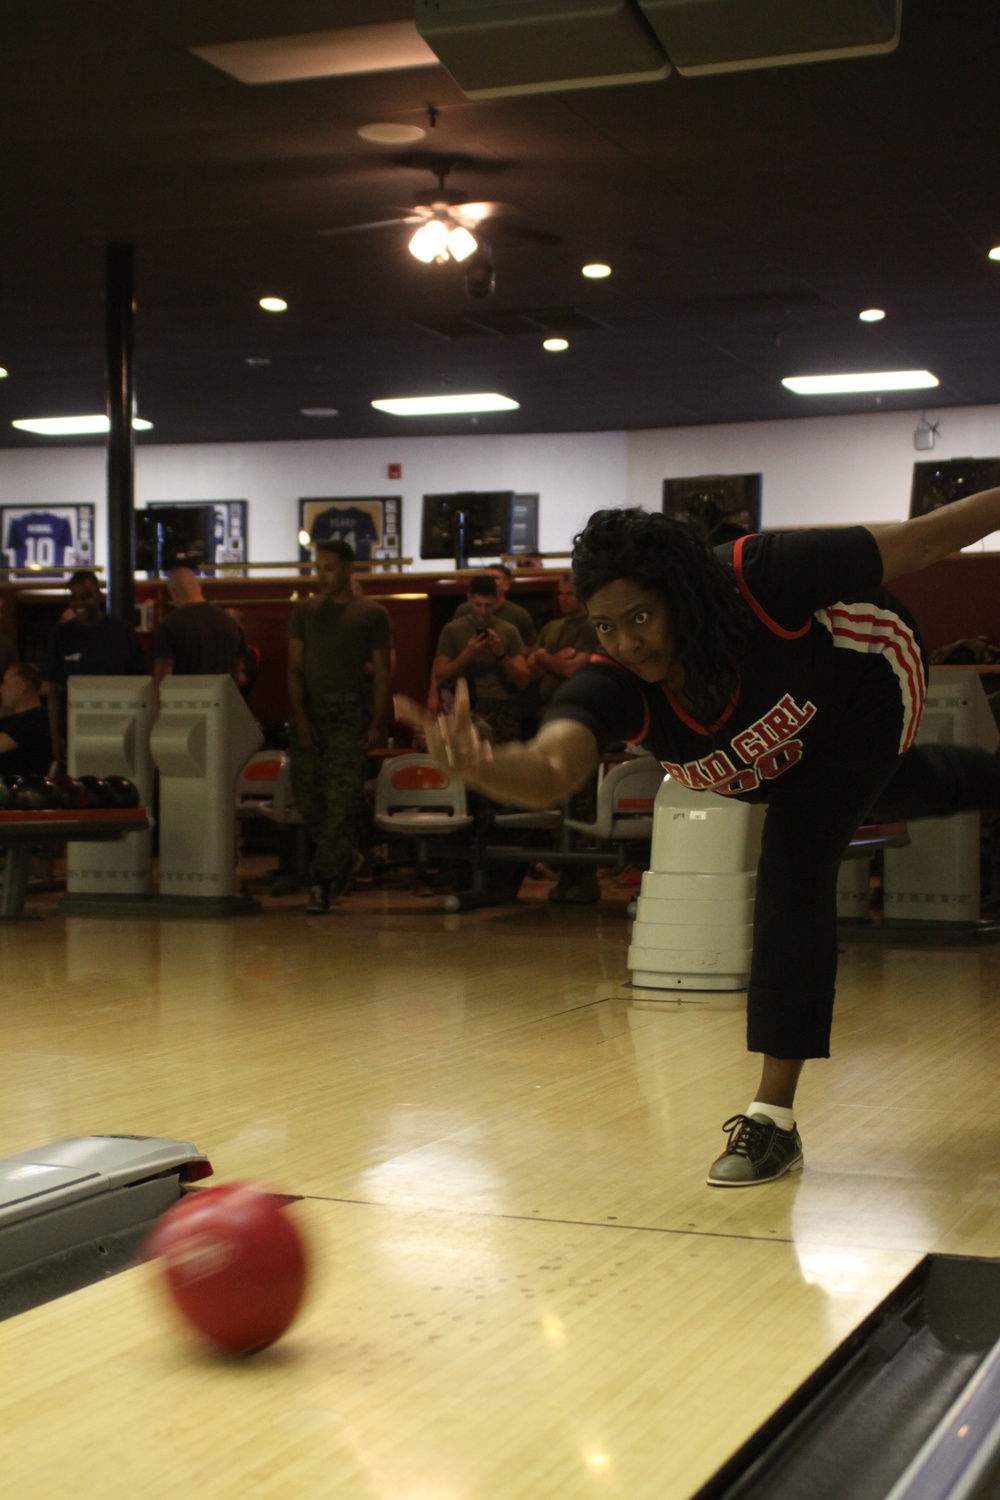 54 keglers compete in CG's cup bowling tourney